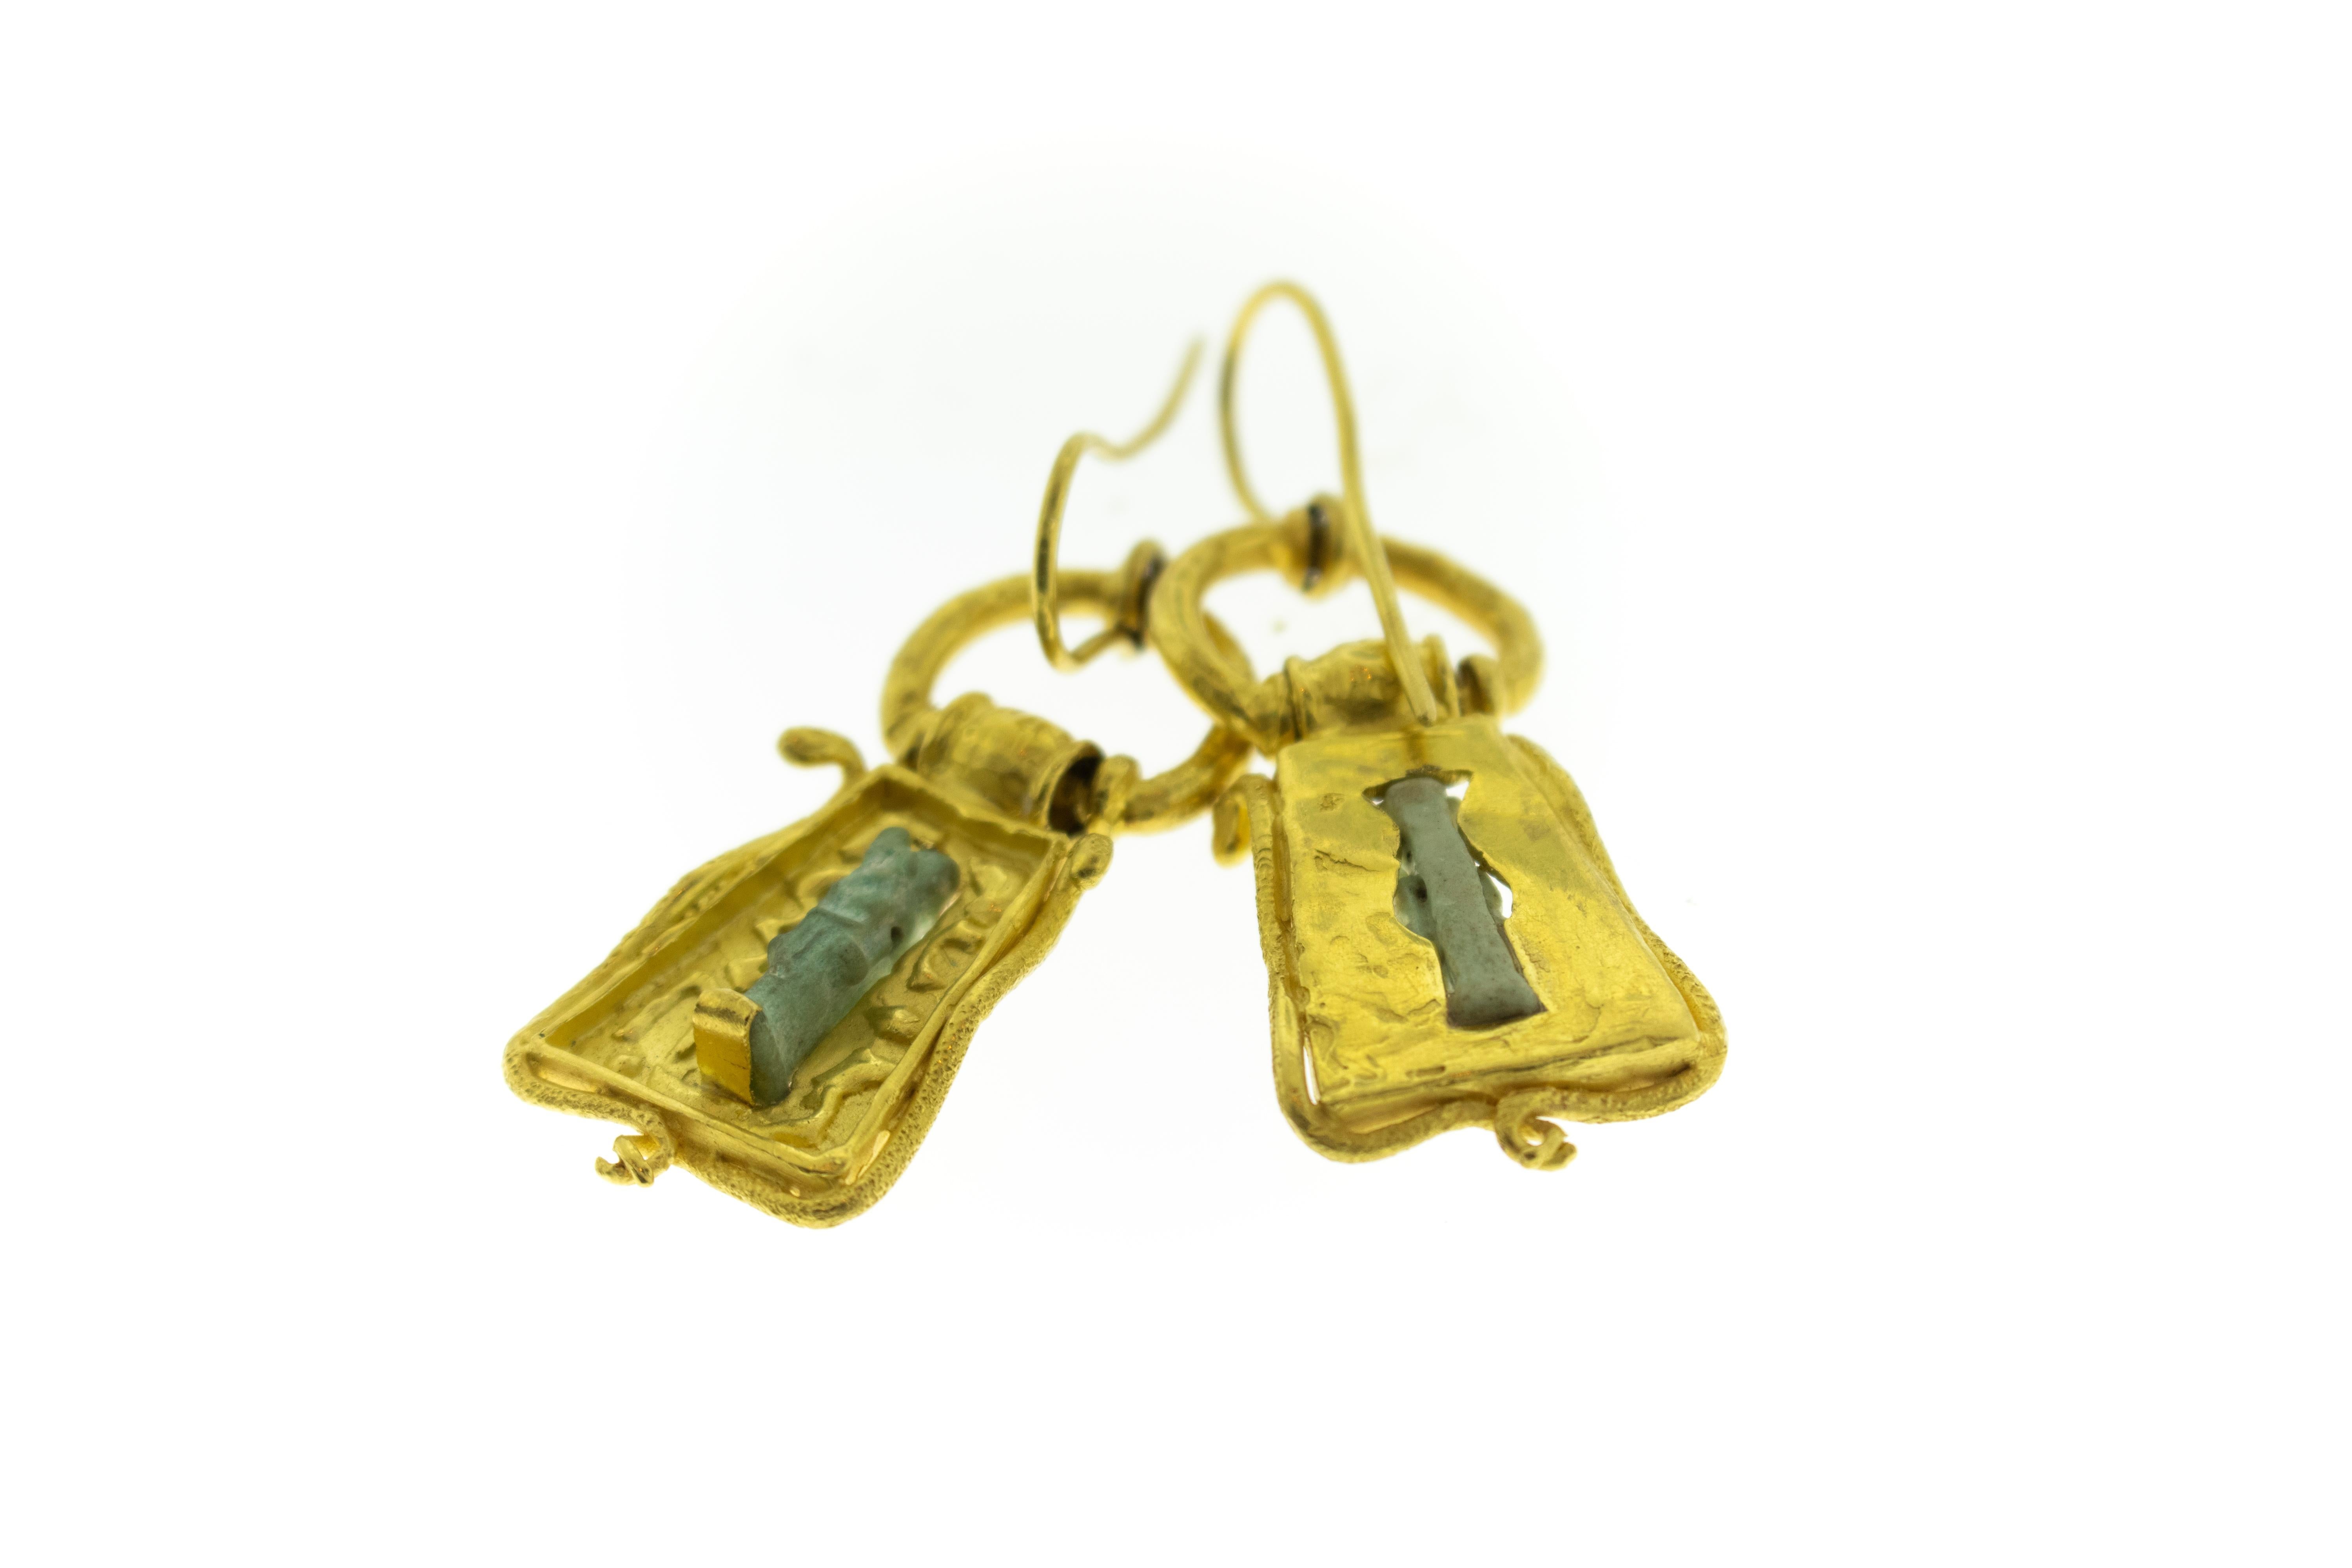 Ancient Egyptian Stone Artifact 22k Gold Earrings. Figures are a color like a rusted copper light green. 22k Gold casing was not made in ancient time. They're long hooked earrings.  Earrings are 2.25 inches long, 1 inch width and figure alone is .75